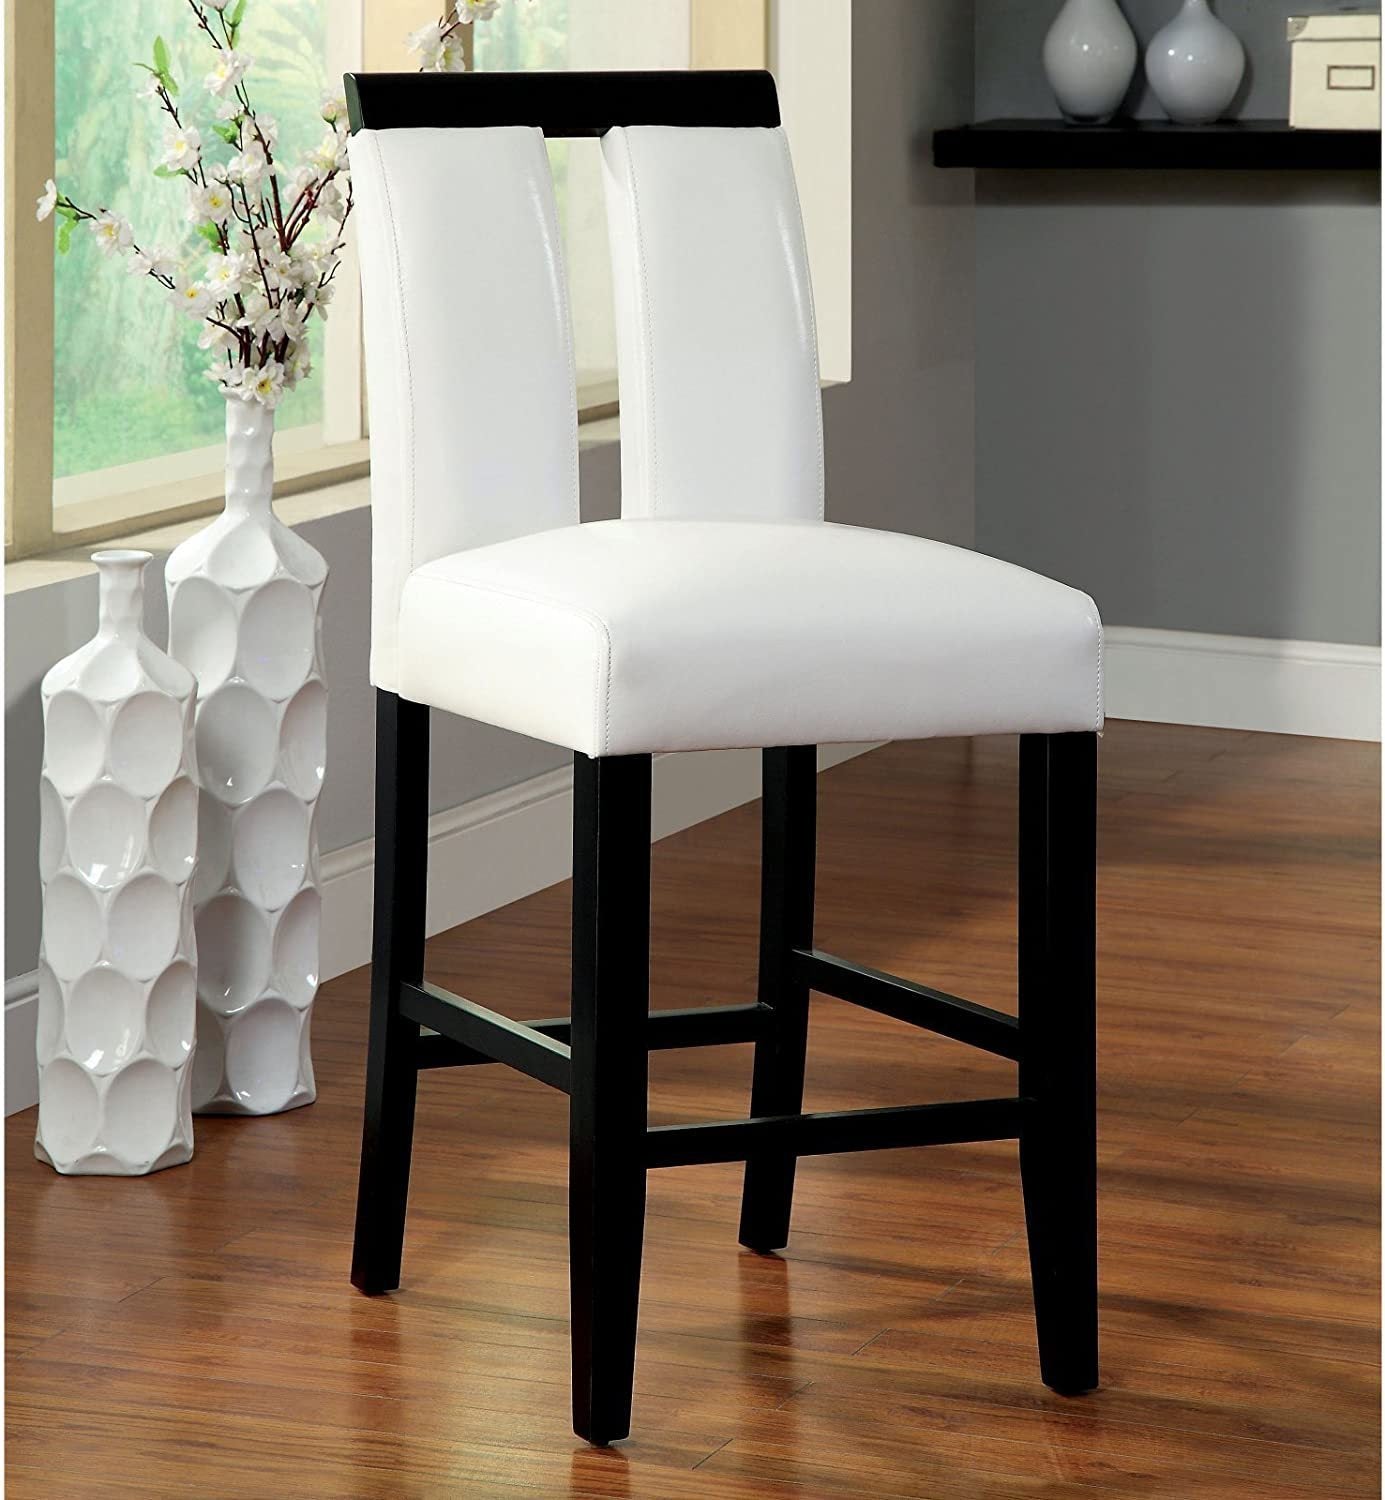 Set of 2 Chairs Black And White Leatherette Beautiful Padded Counter height Chairs Slit Back Design Kitchen Dining Room Furniture